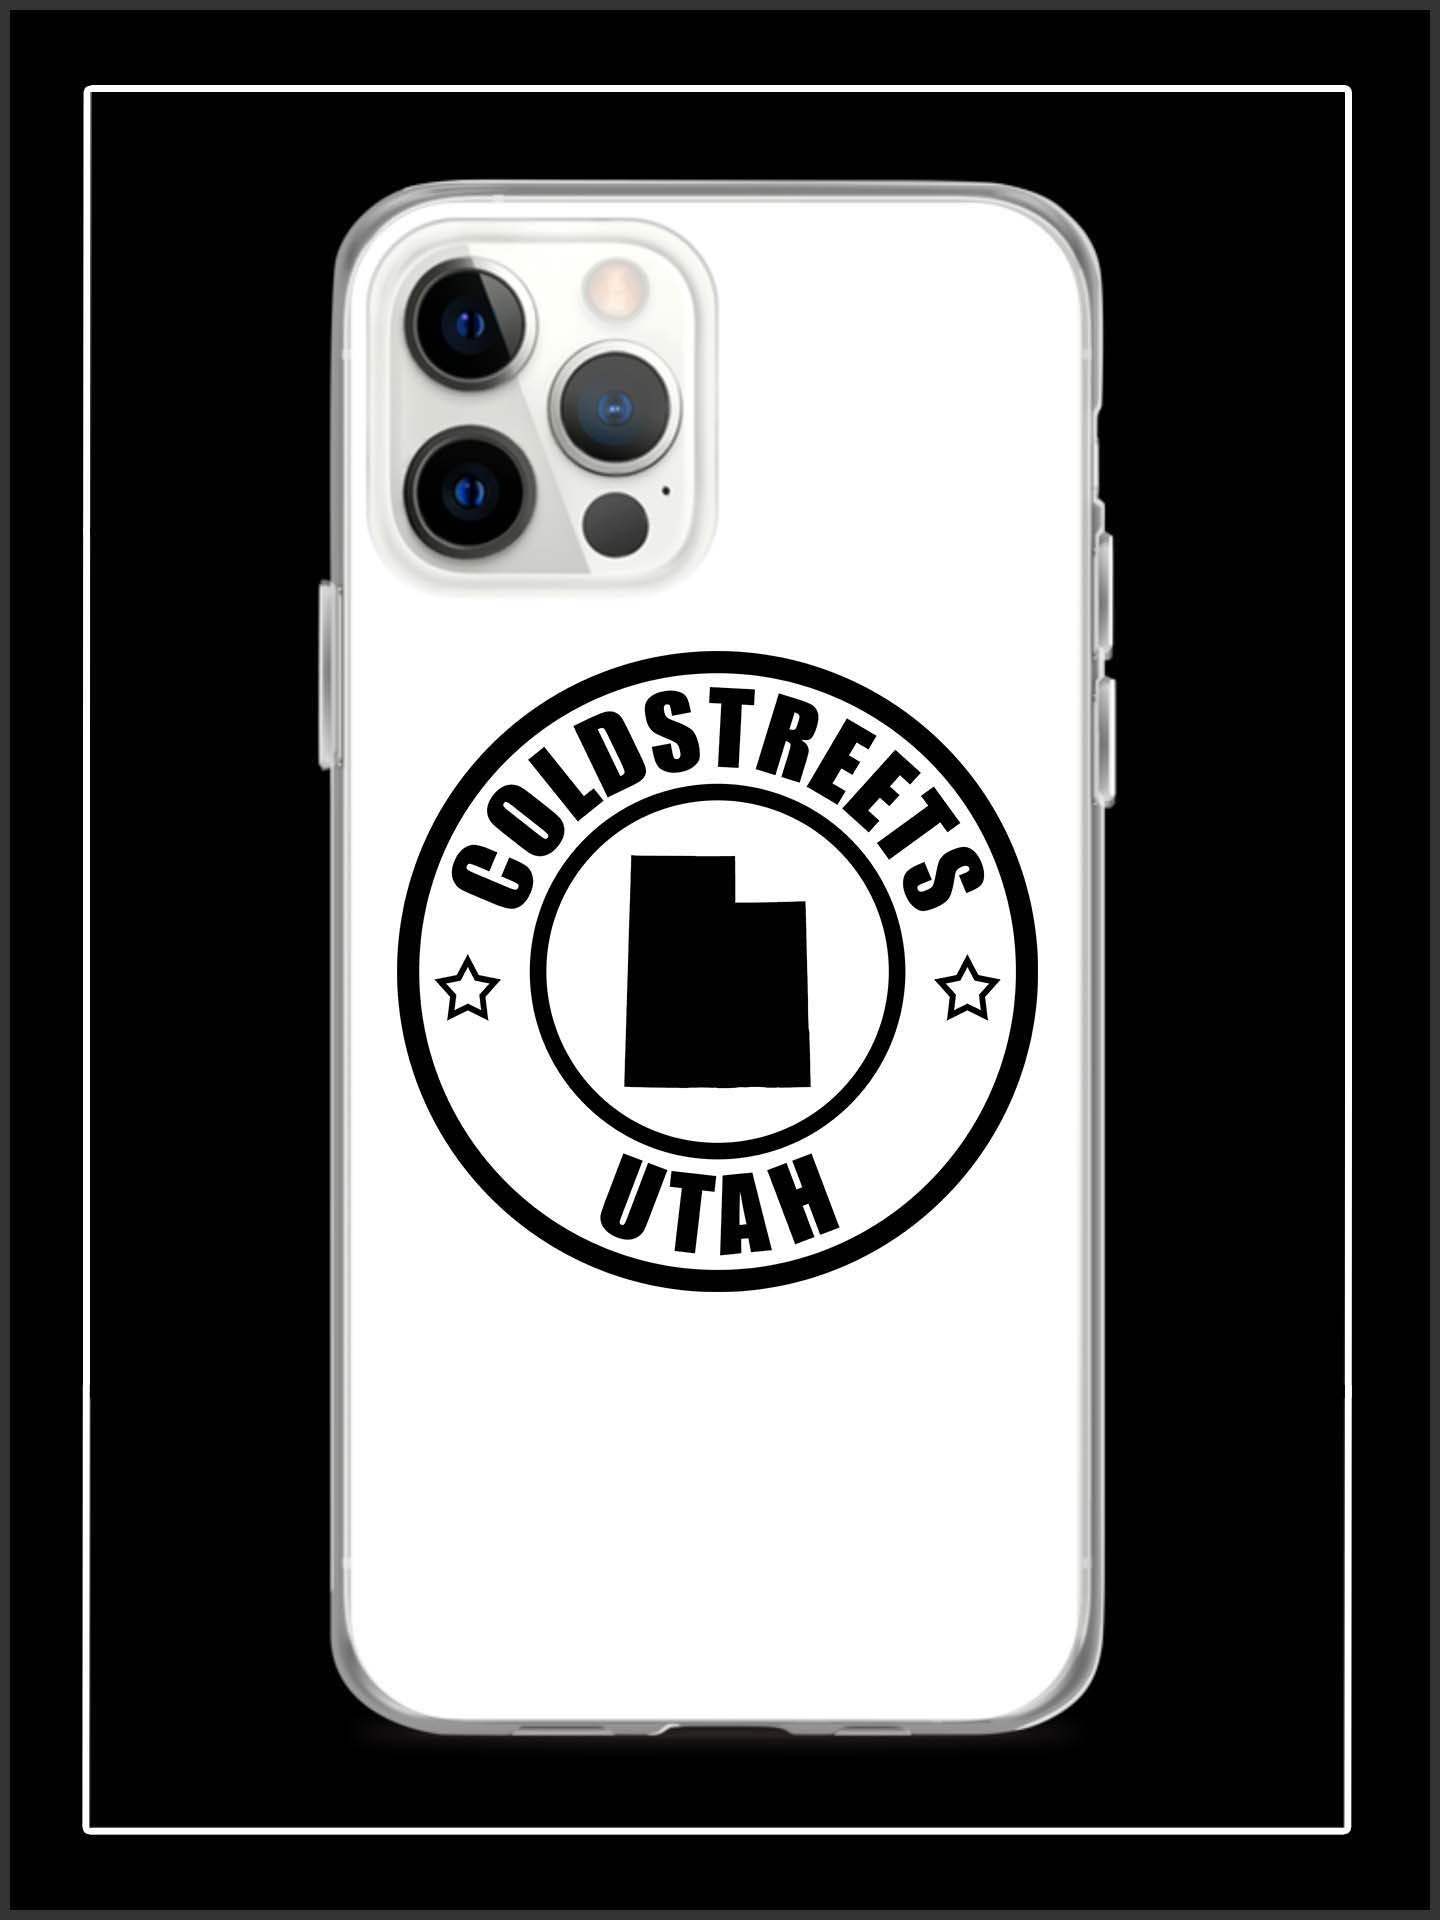 Cold Streets Utah iPhone Cases